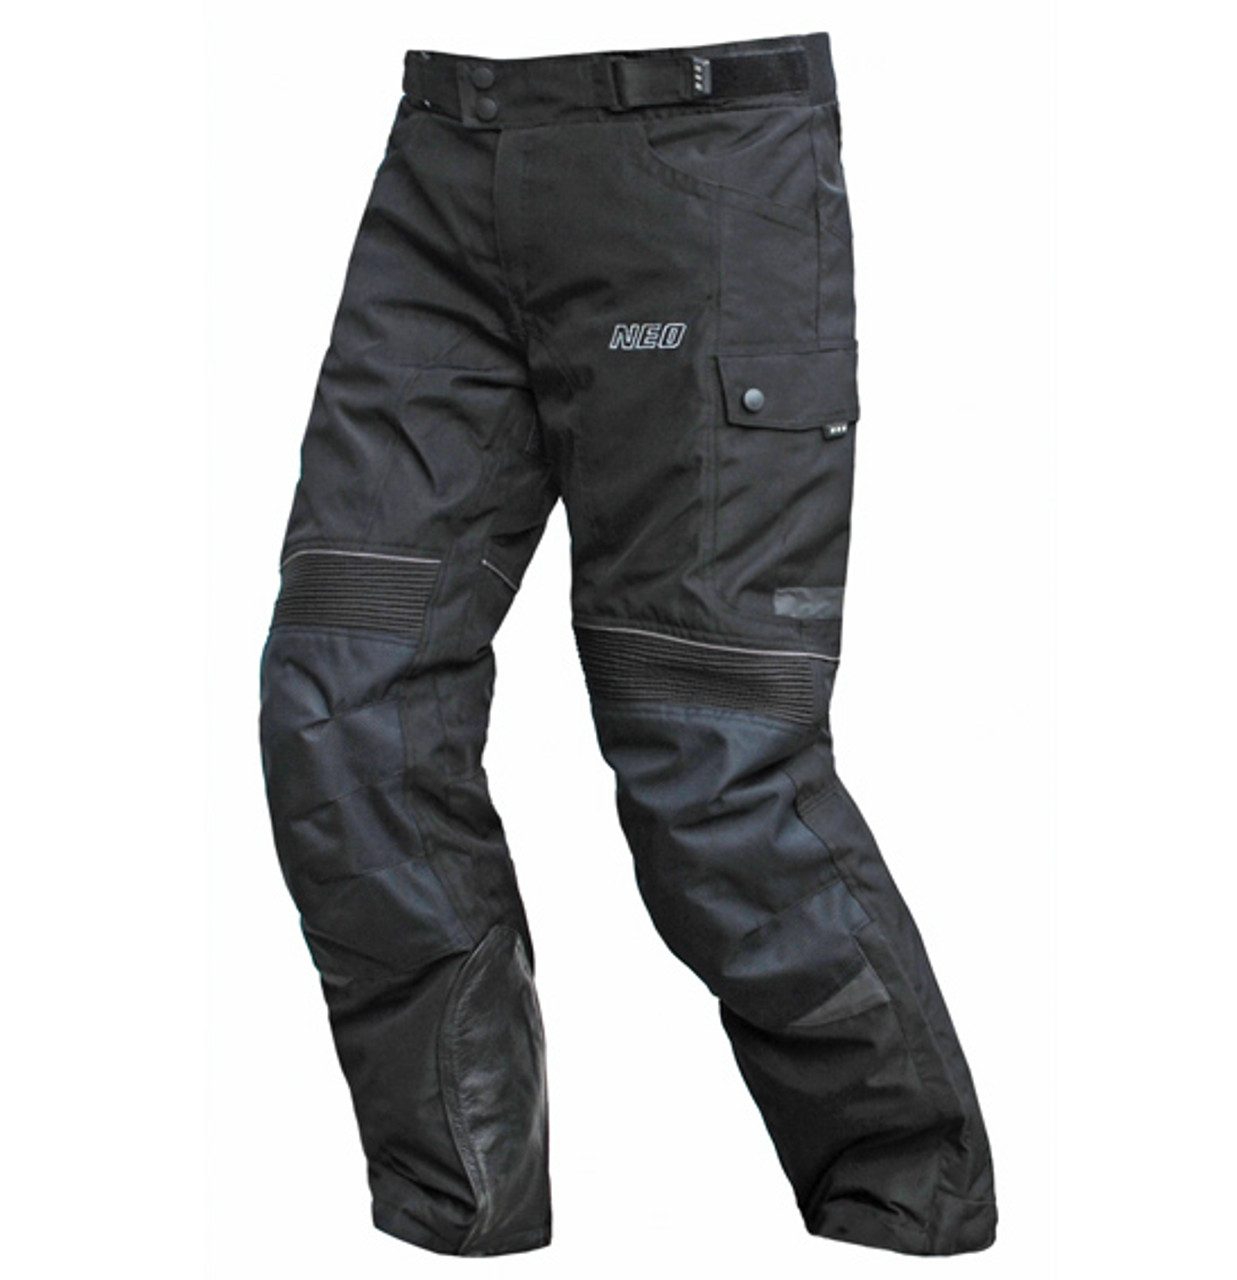 Master Motorcycle Trousers / Pants with Braces, Black